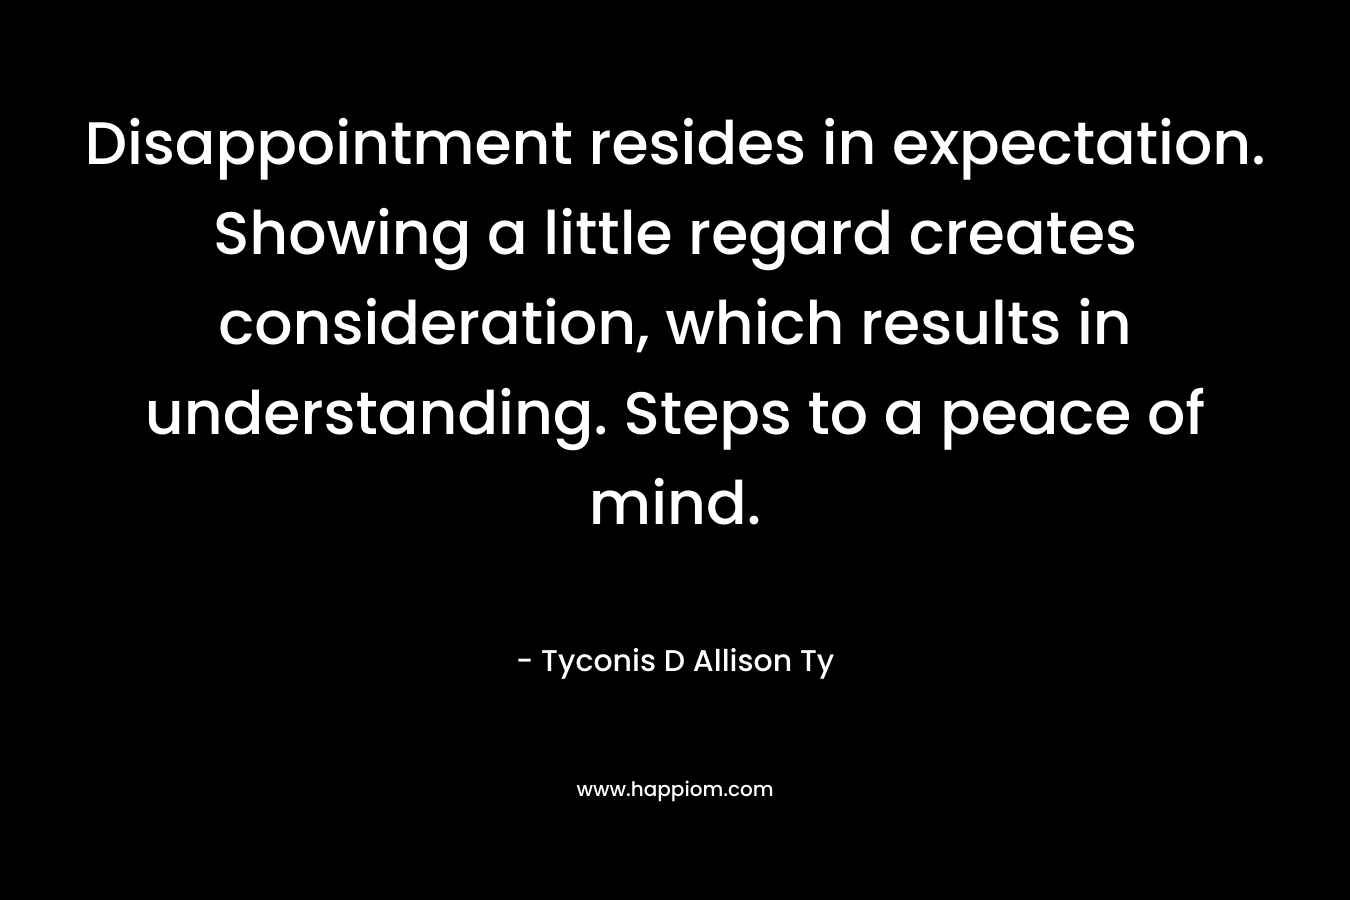 Disappointment resides in expectation. Showing a little regard creates consideration, which results in understanding. Steps to a peace of mind.